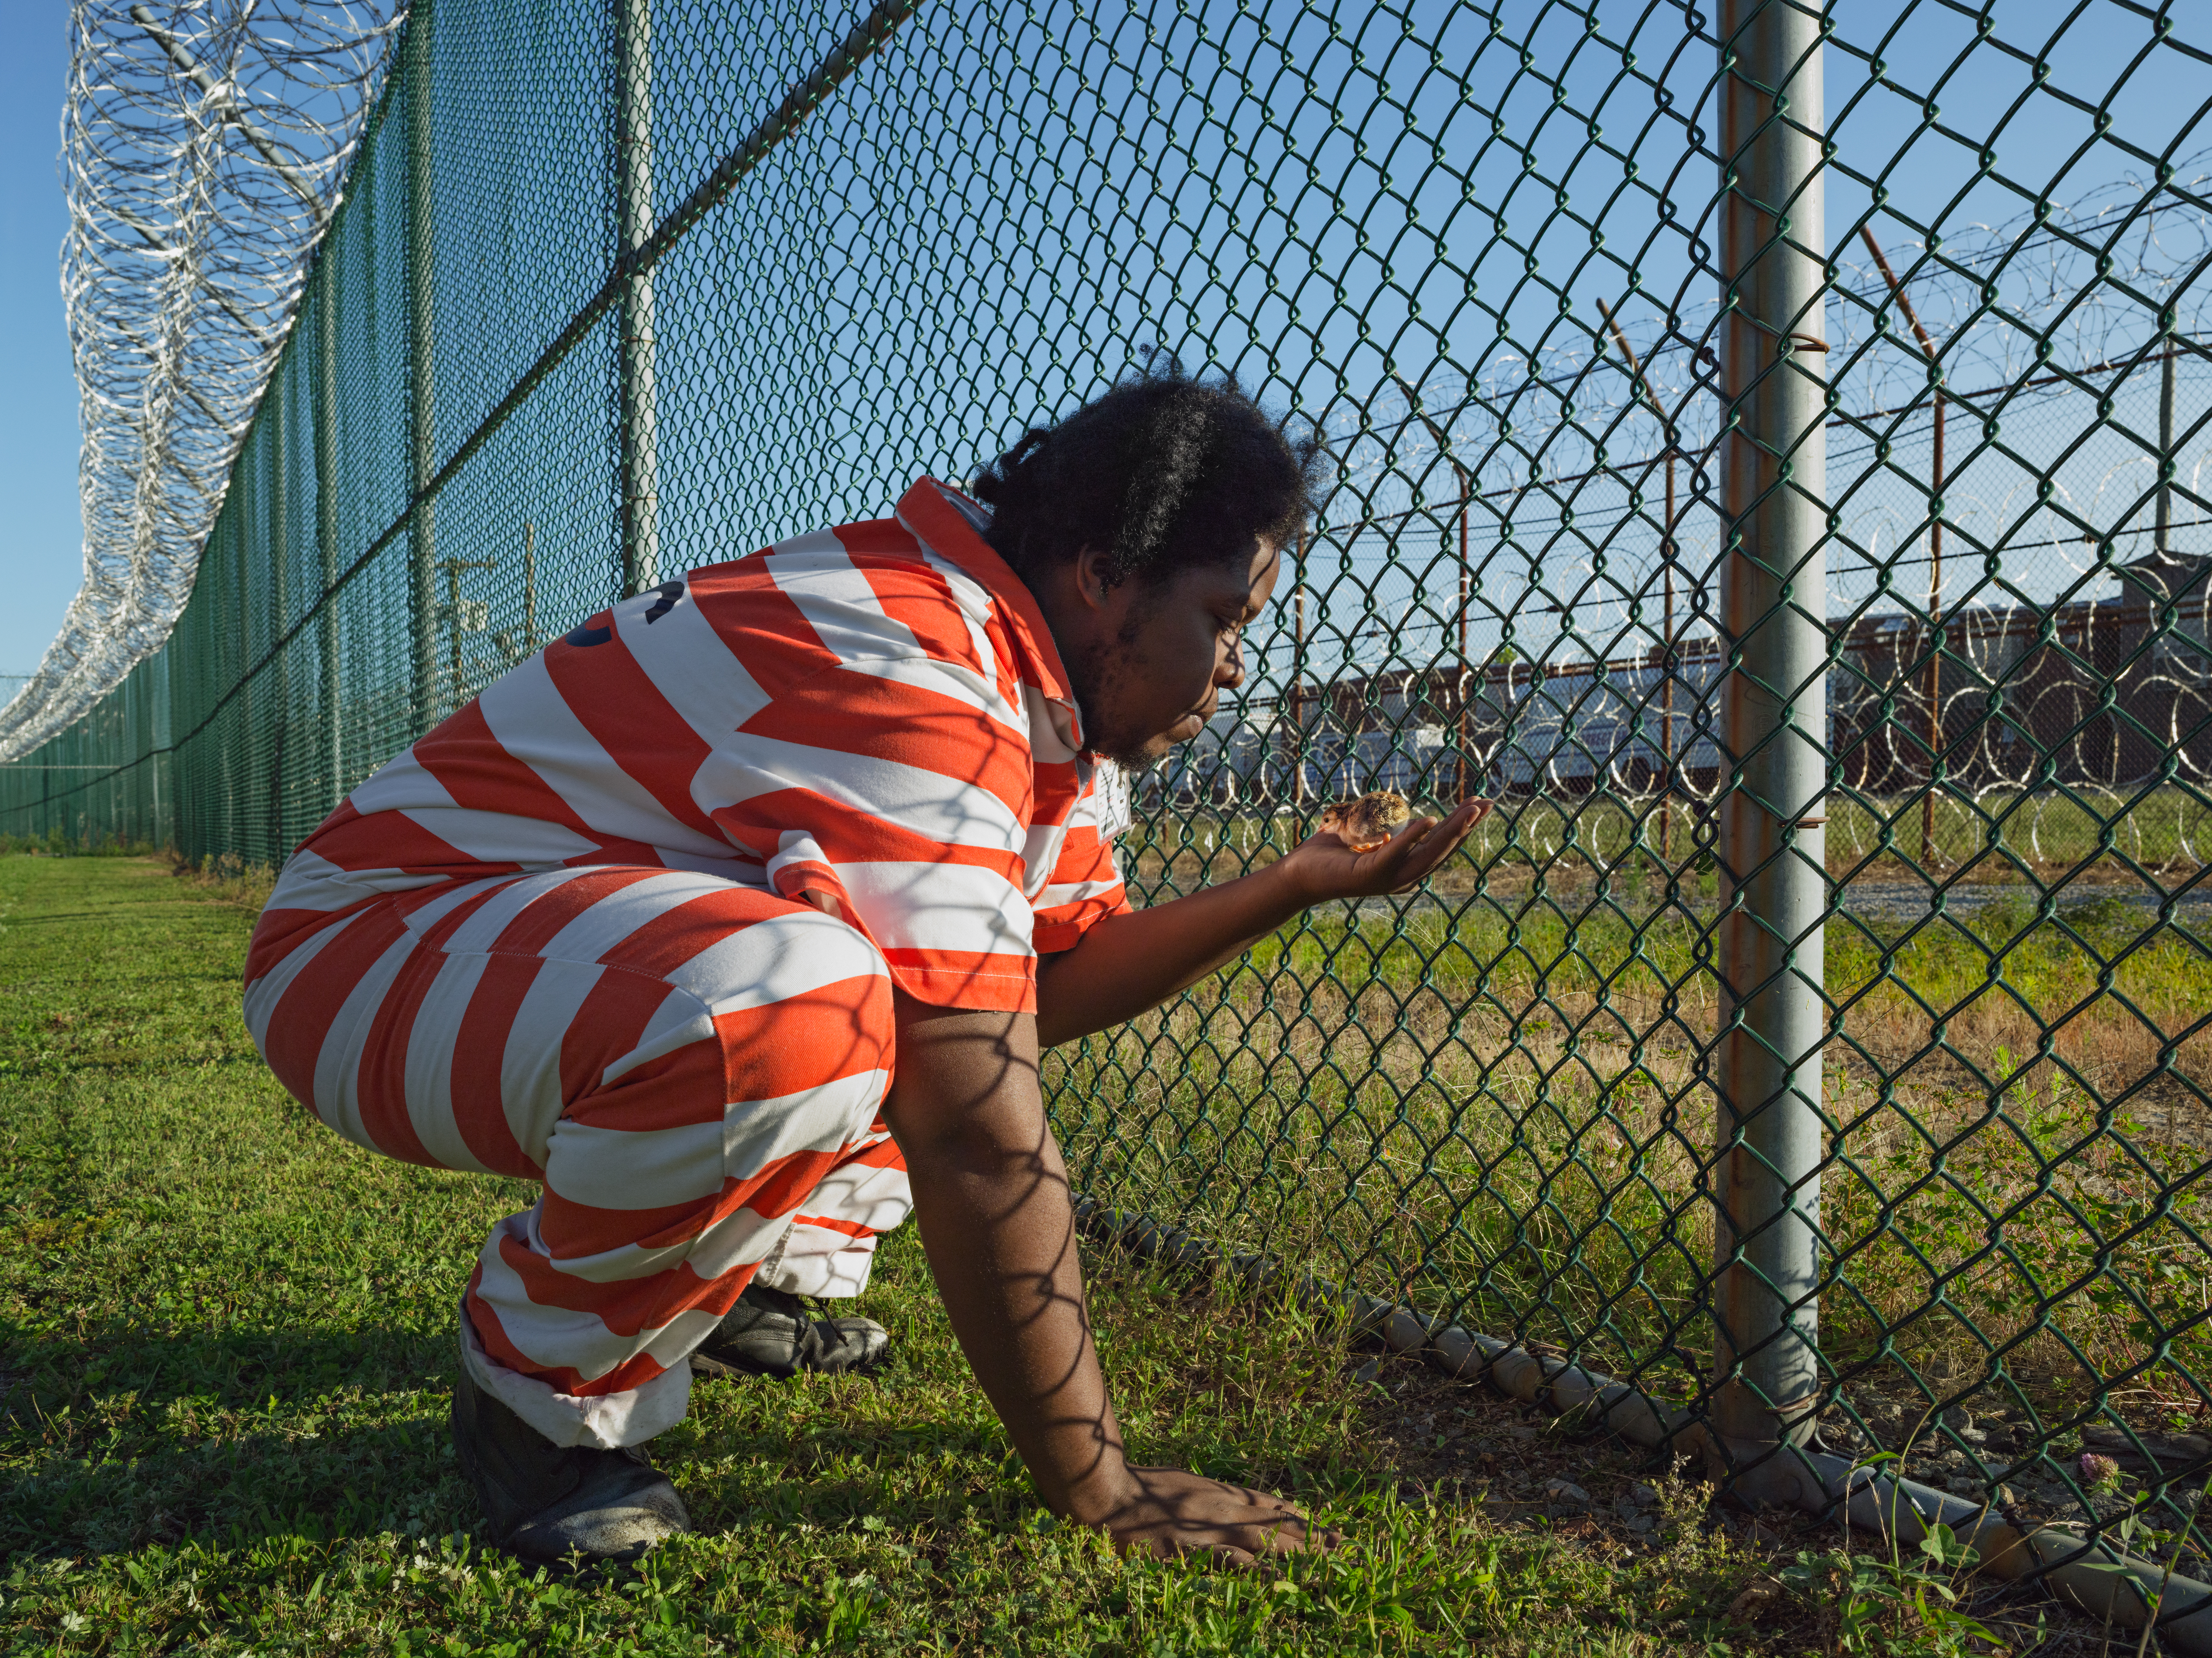 Troy Holding a Guinea Fowl Chick, Rikers Island Jail Complex, New York  2014